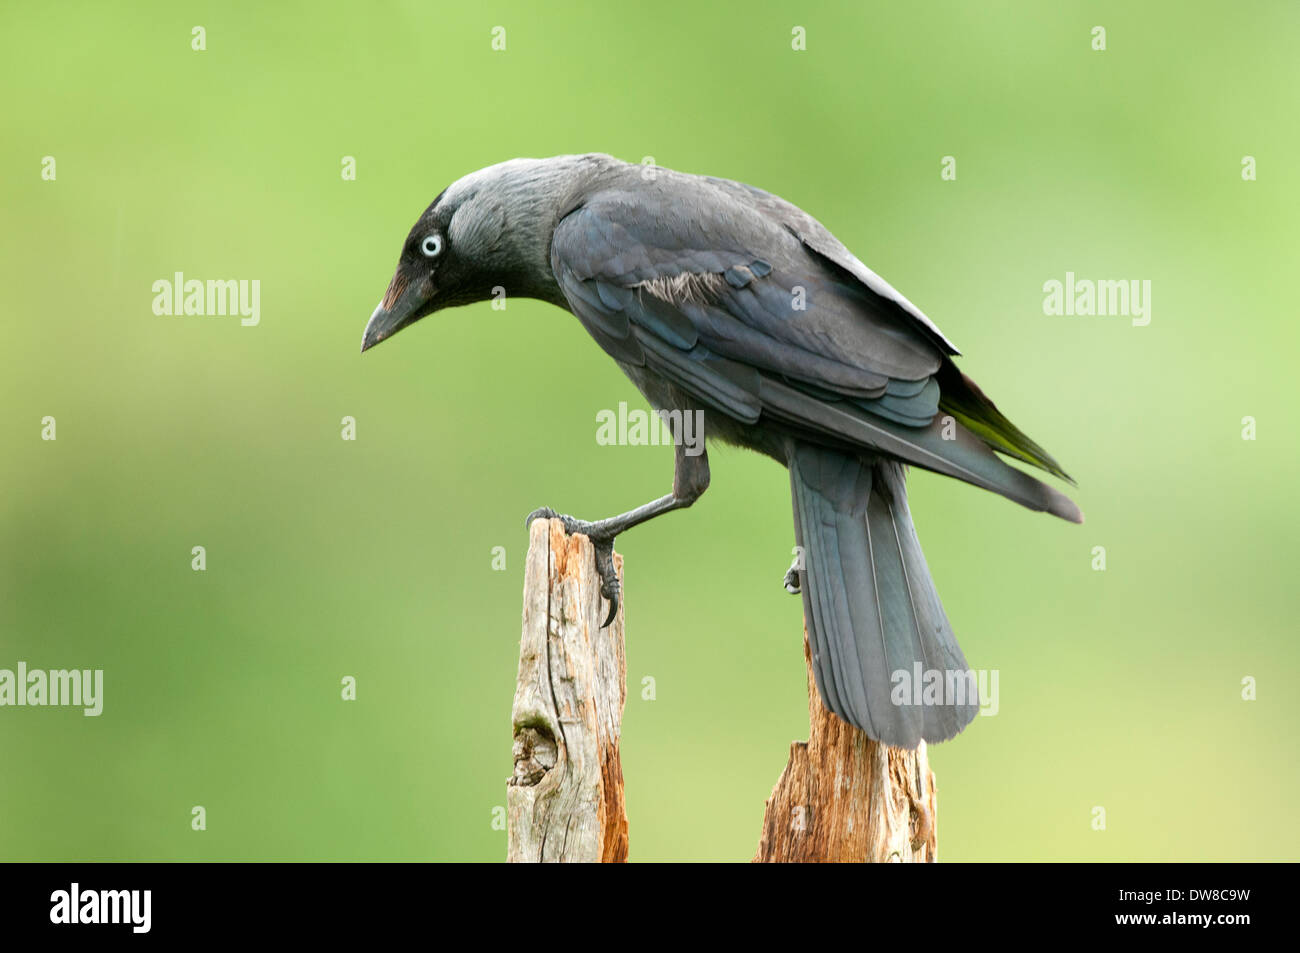 a jackdaw  perched on a old tree stump Stock Photo